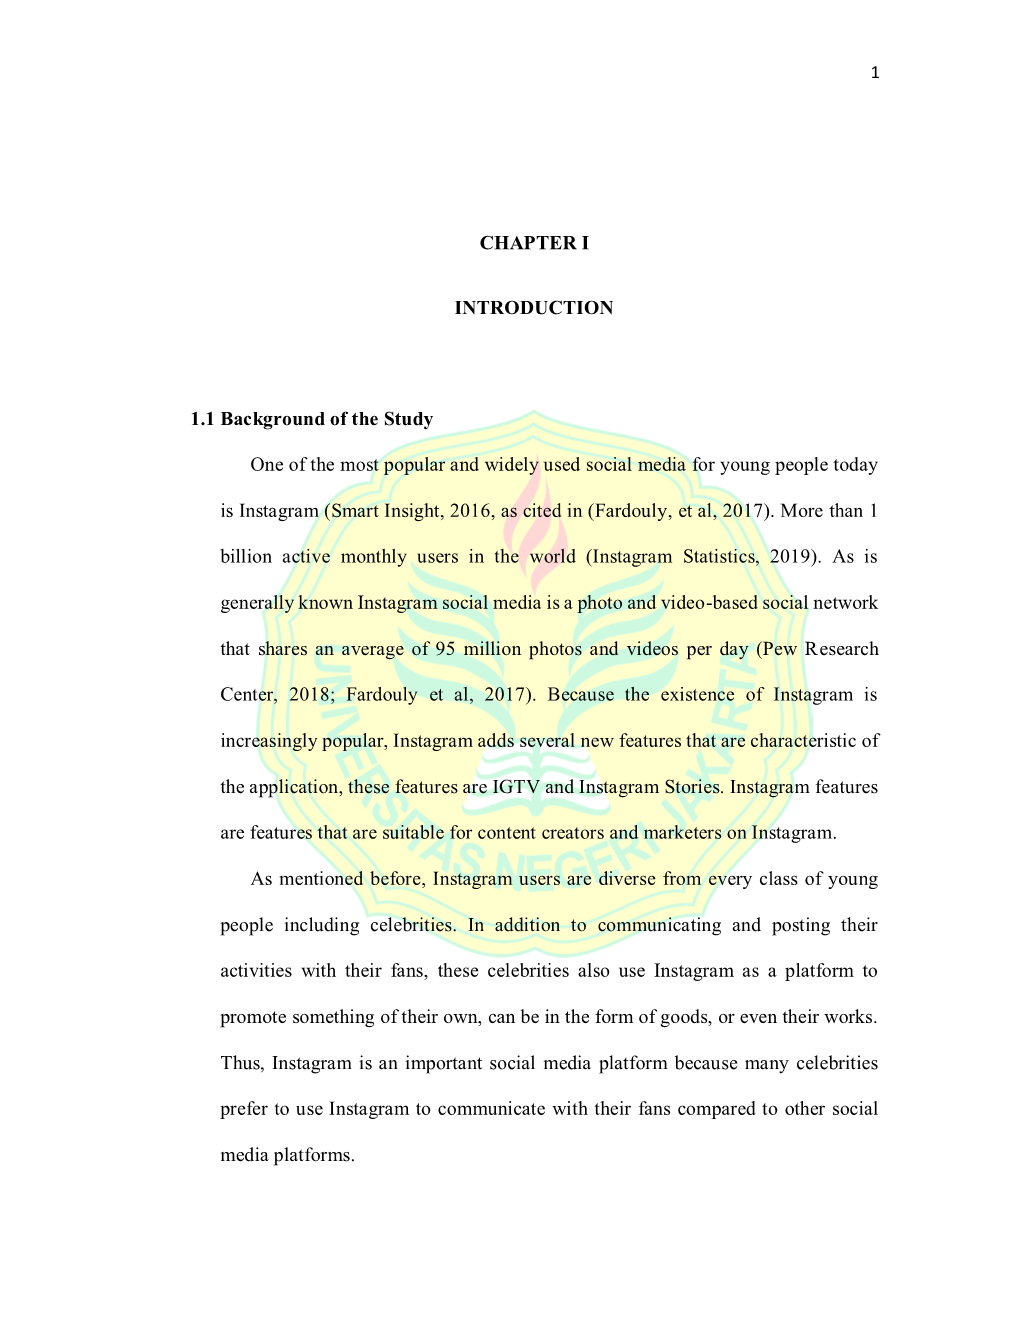 CHAPTER I INTRODUCTION 1.1 Background of the Study One of The